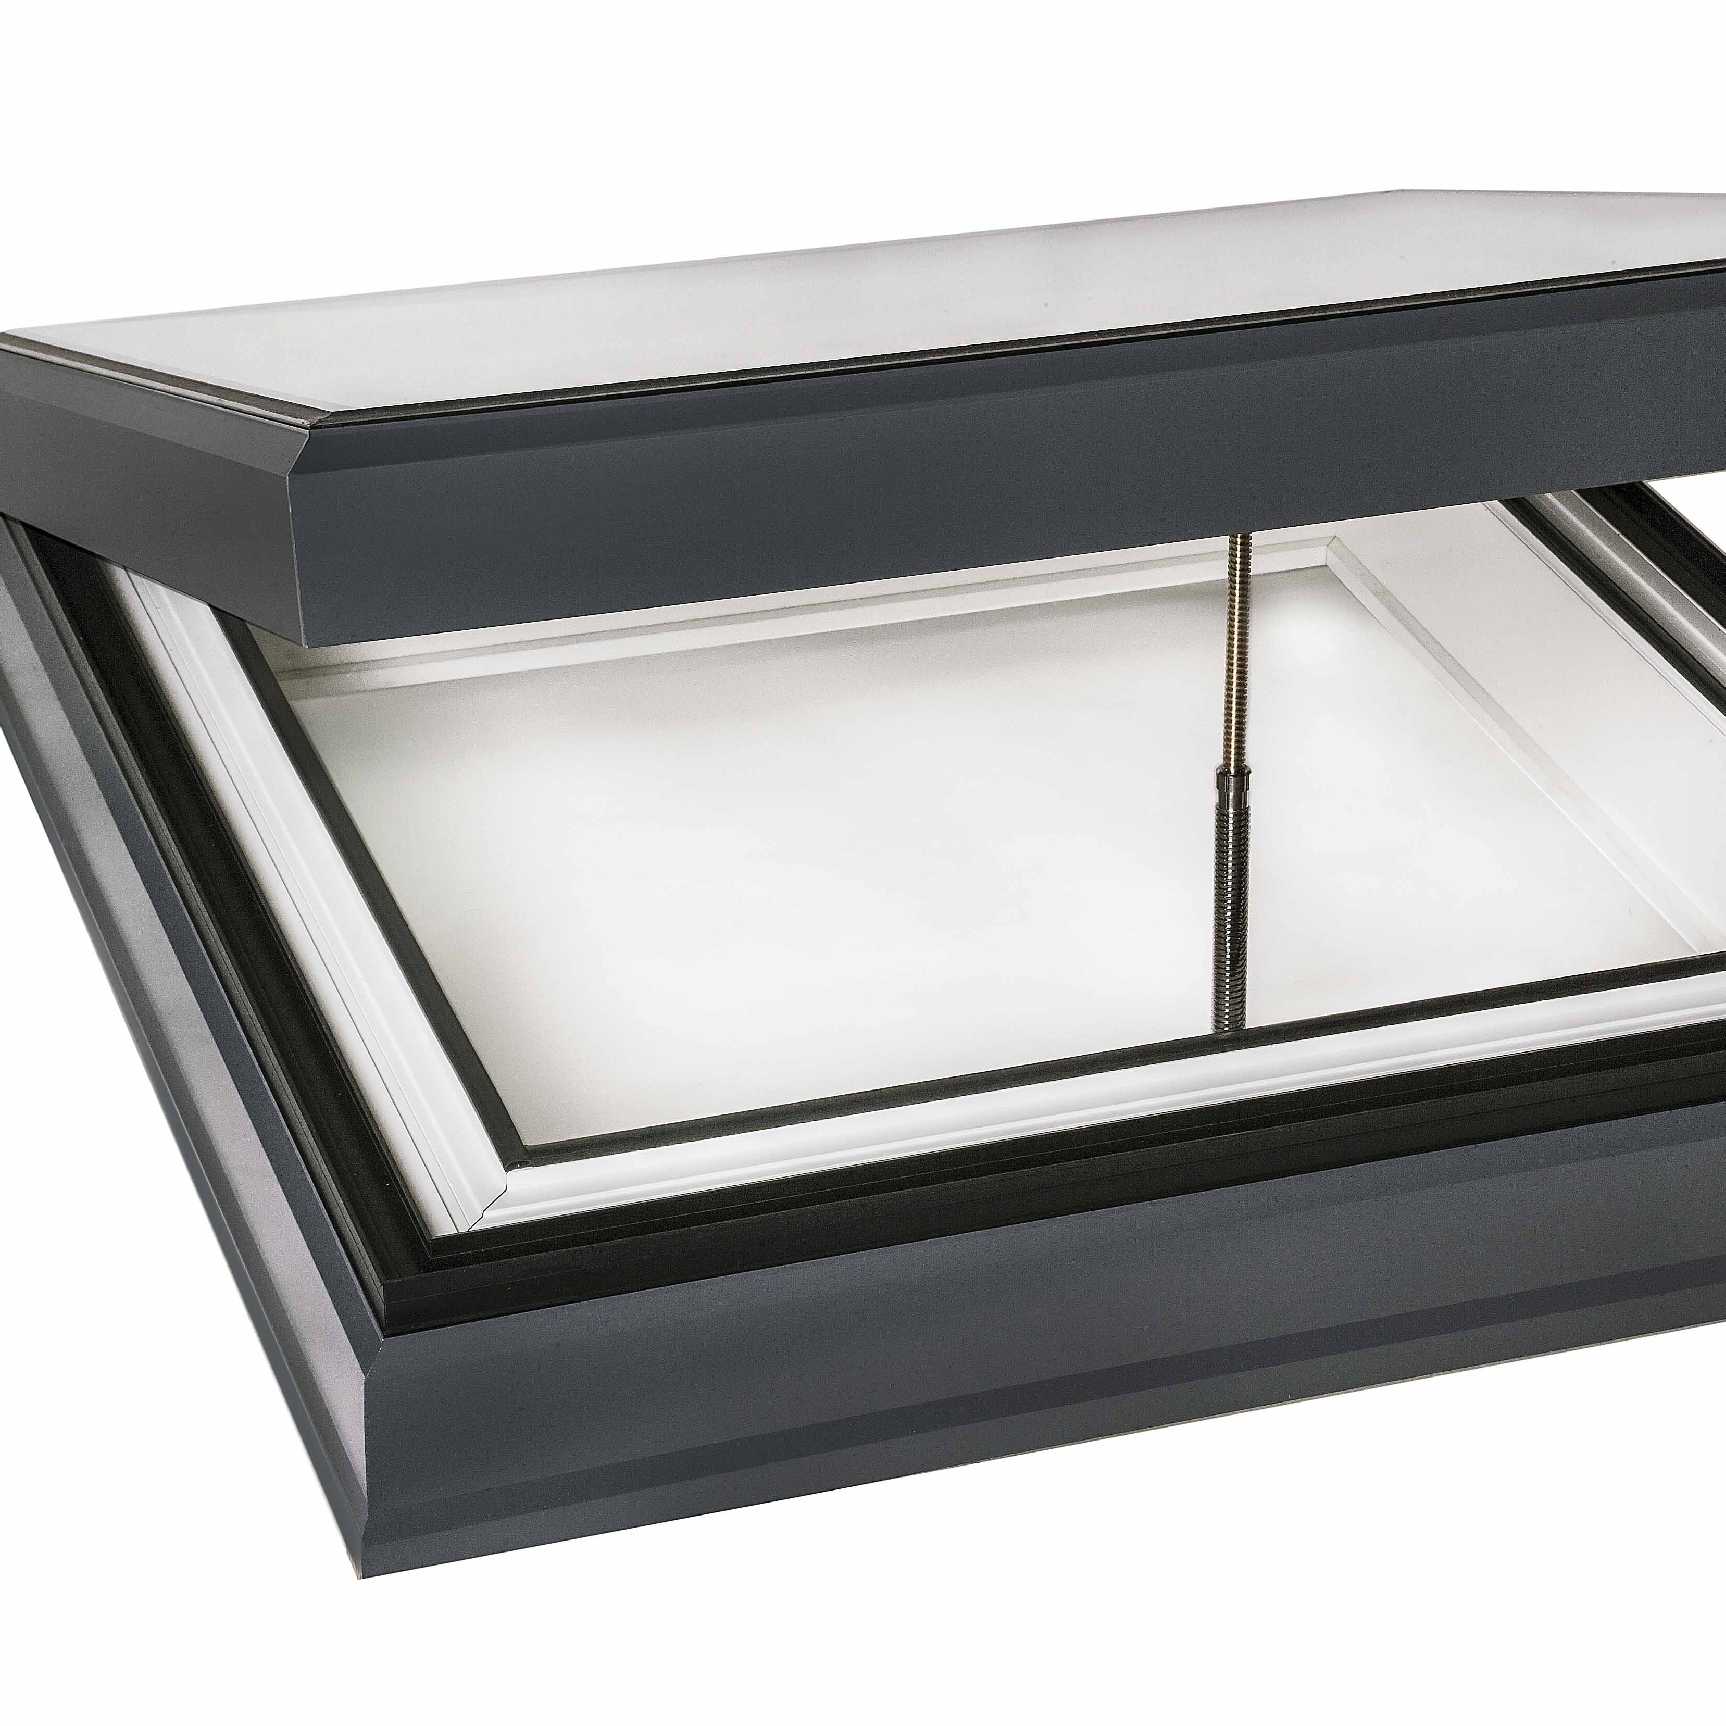 Great deals on EcoGard Flat Roof light, Double Glazed, Electric Opening, 1,000mm x 1,500mm